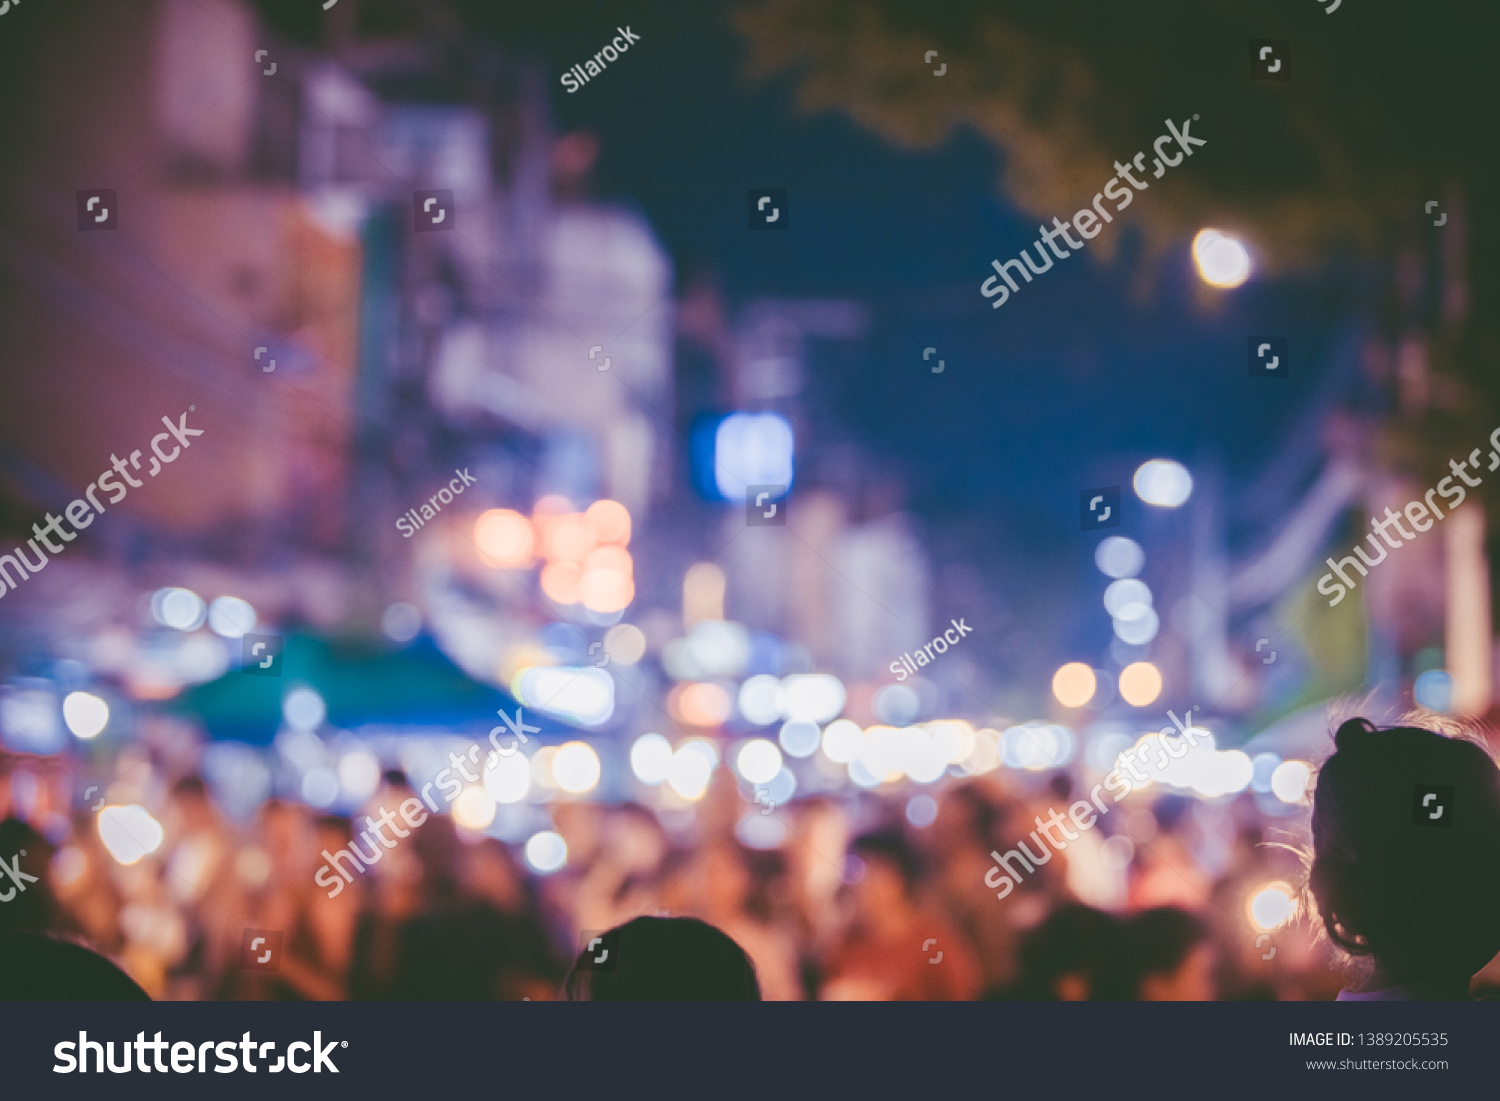 Abstract Blurred image of  people walking in the street at night,bokeh at Walking Street Market,Bokeh background and many people #1389205535